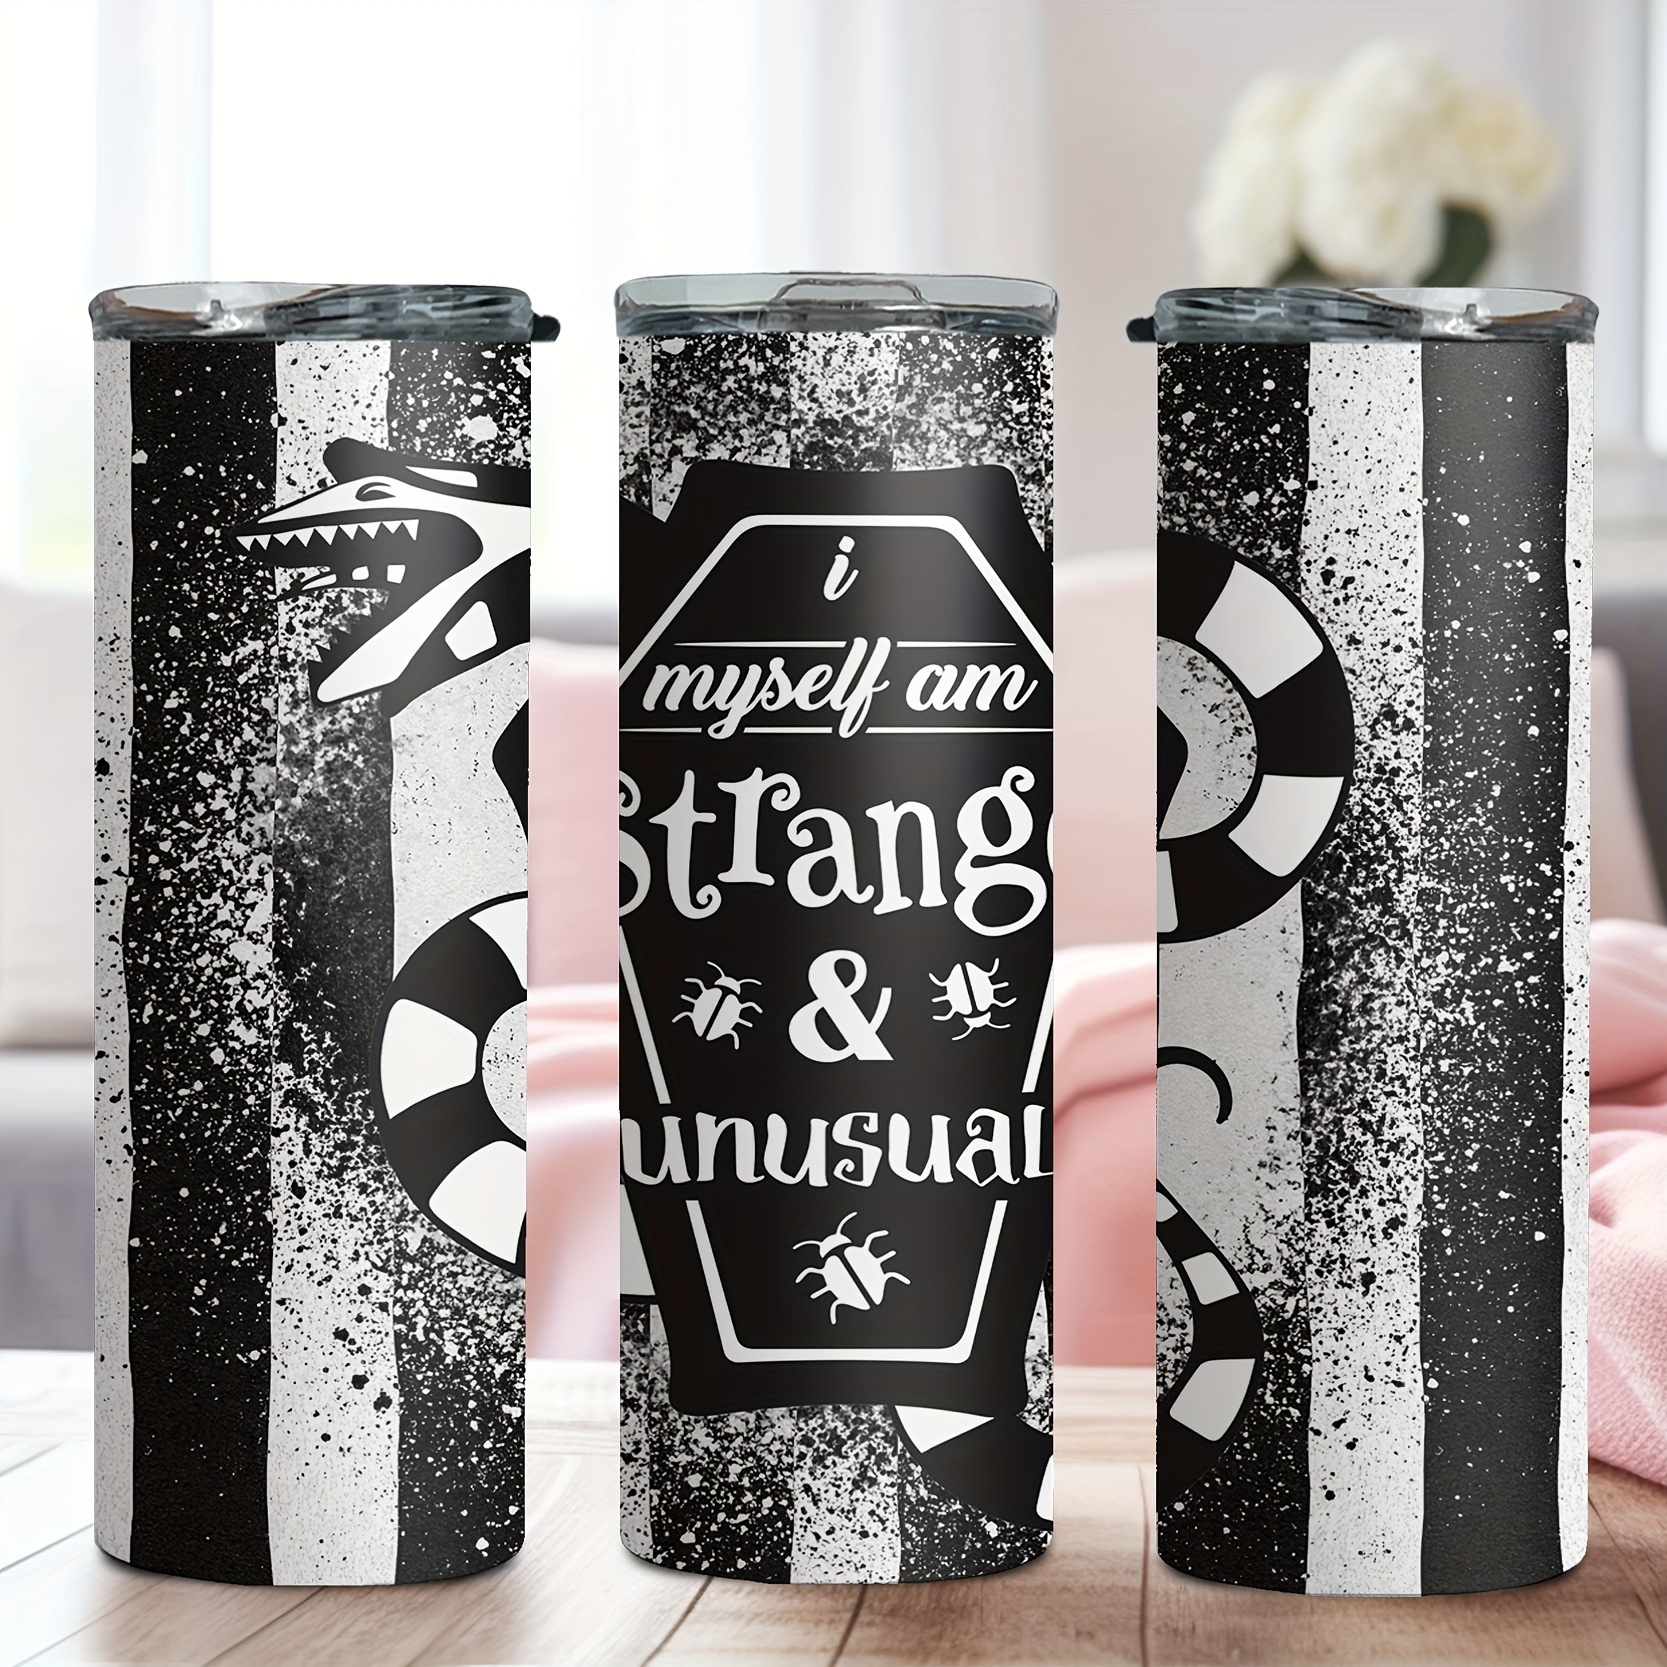 

20oz Halloween-themed Stainless Steel Tumbler With Snake & Strange And Unusual Design - Insulated, Rust-proof, Includes Straw - Perfect Gift For Family And Friends